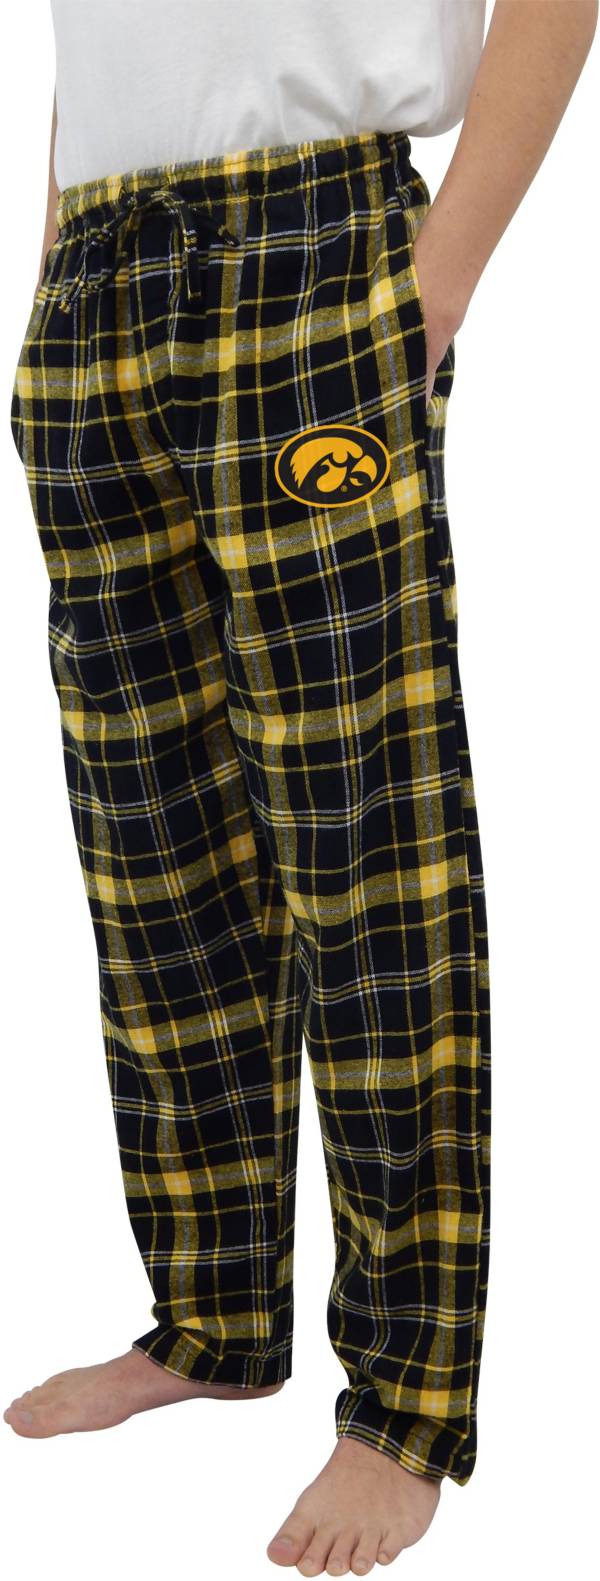 Concepts Sport Men's Iowa Hawkeyes Black Ultimate Embroidered Sleep Pants product image